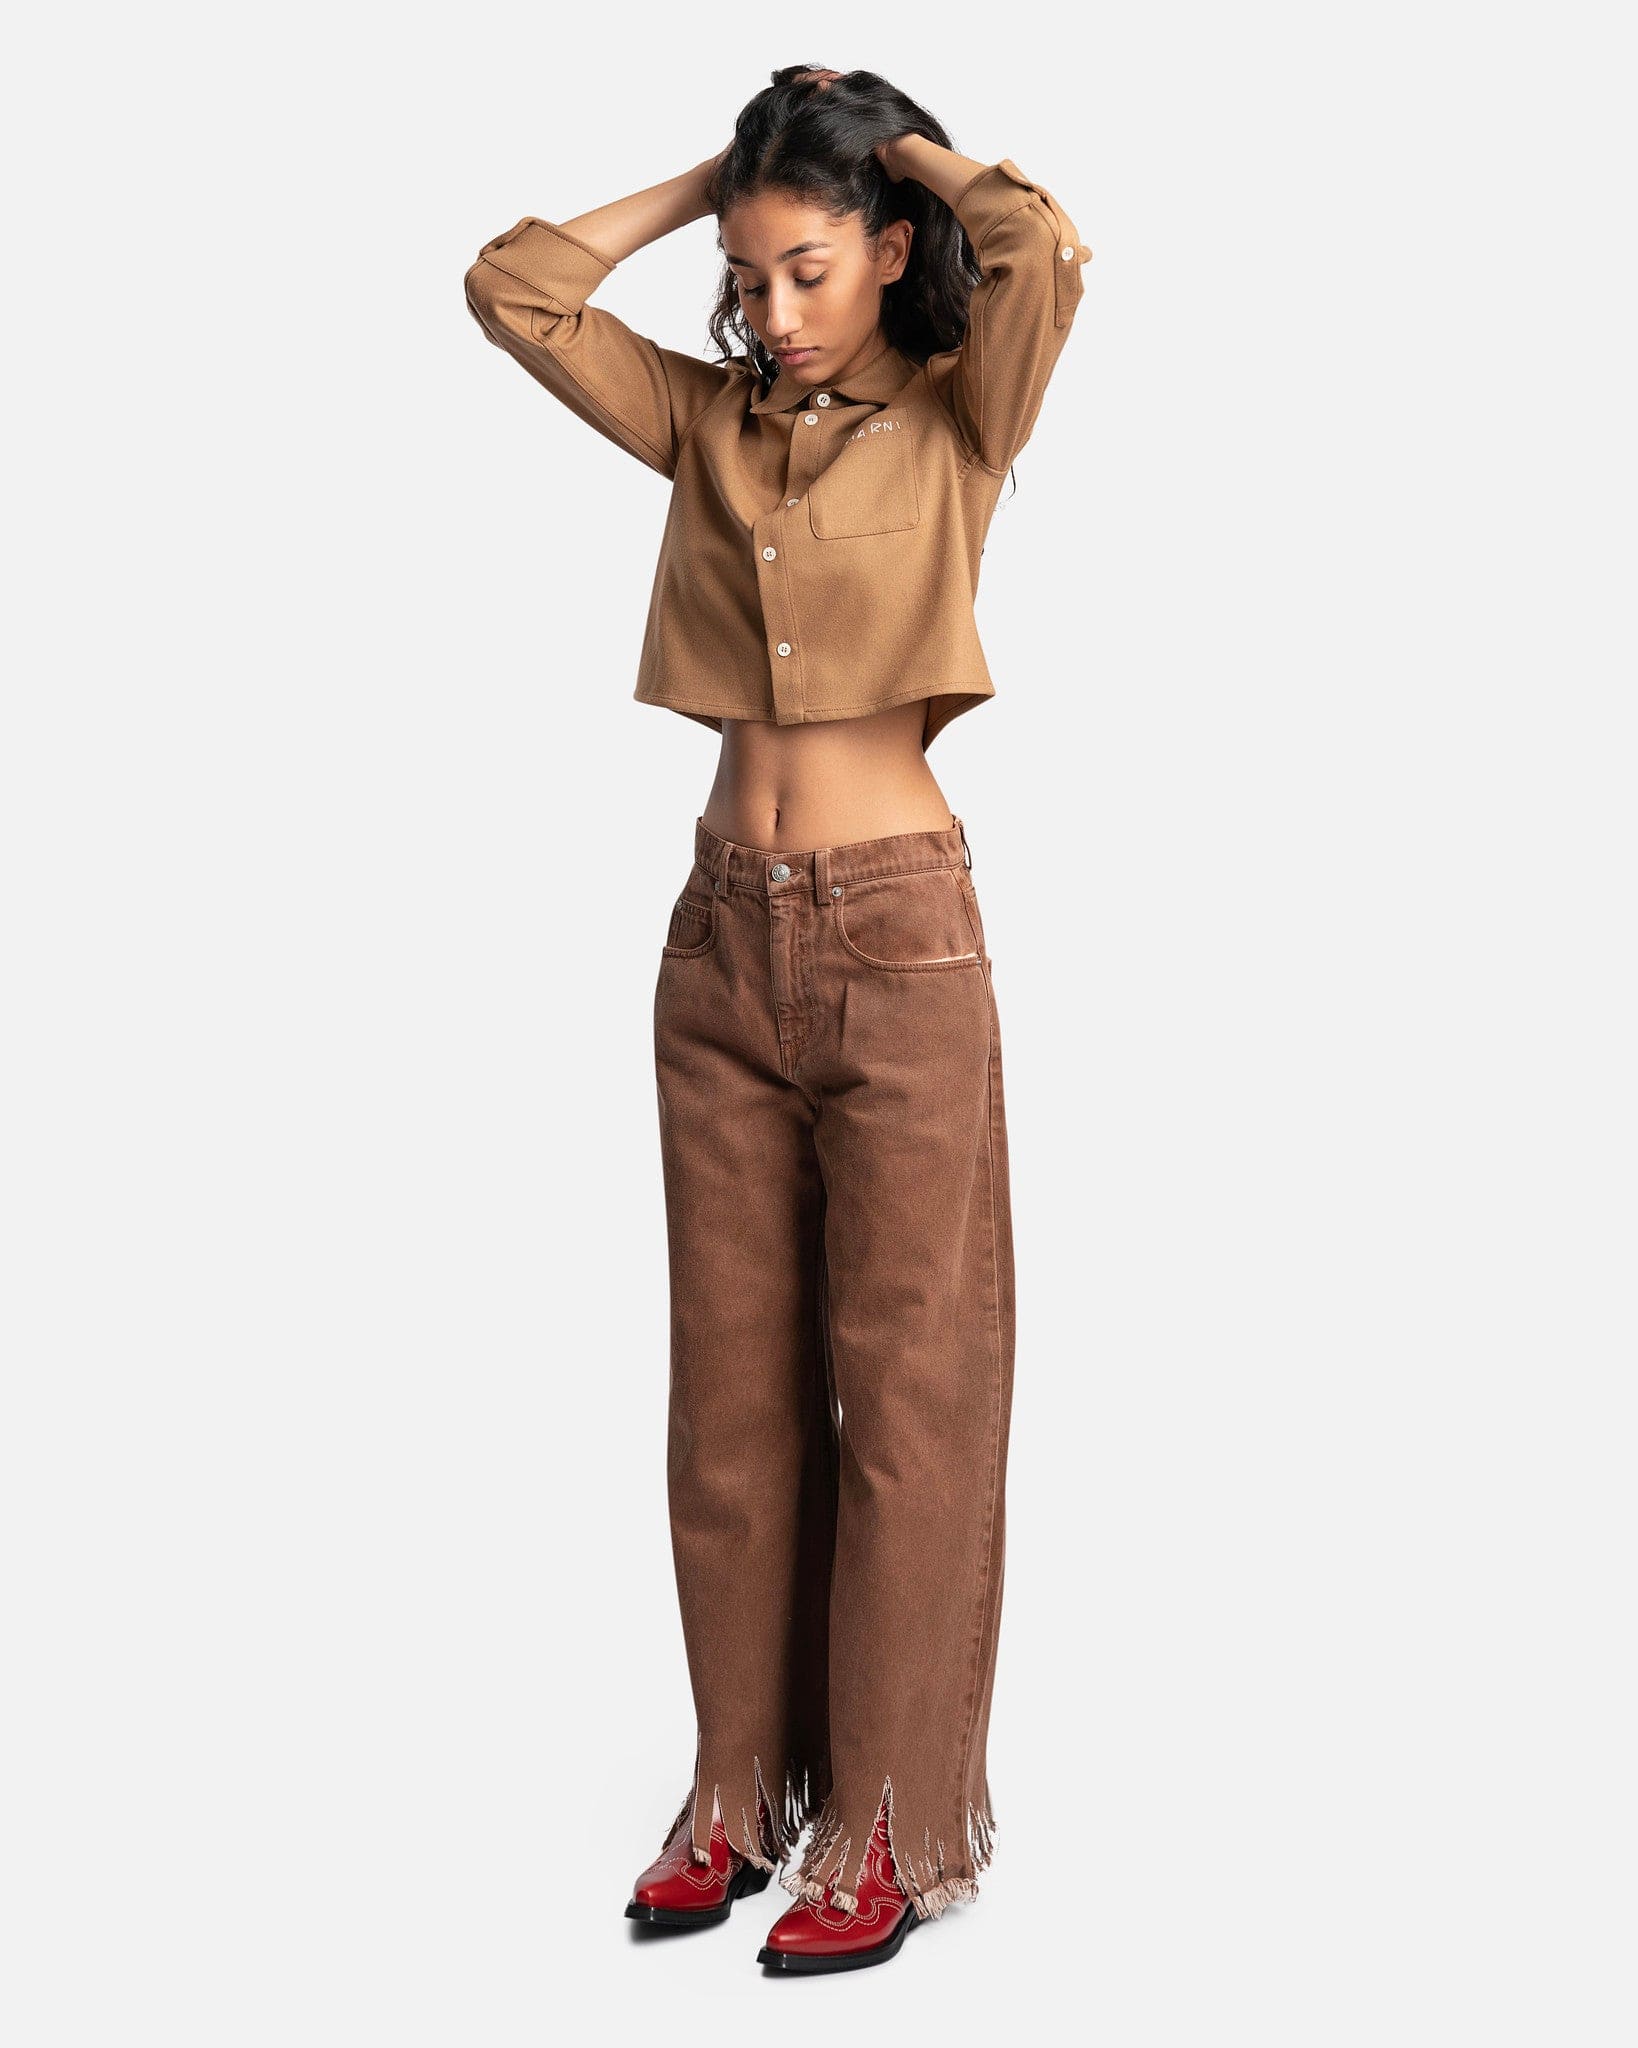 SVRN Women’s Coated Drill Pants in Earth of Sienna